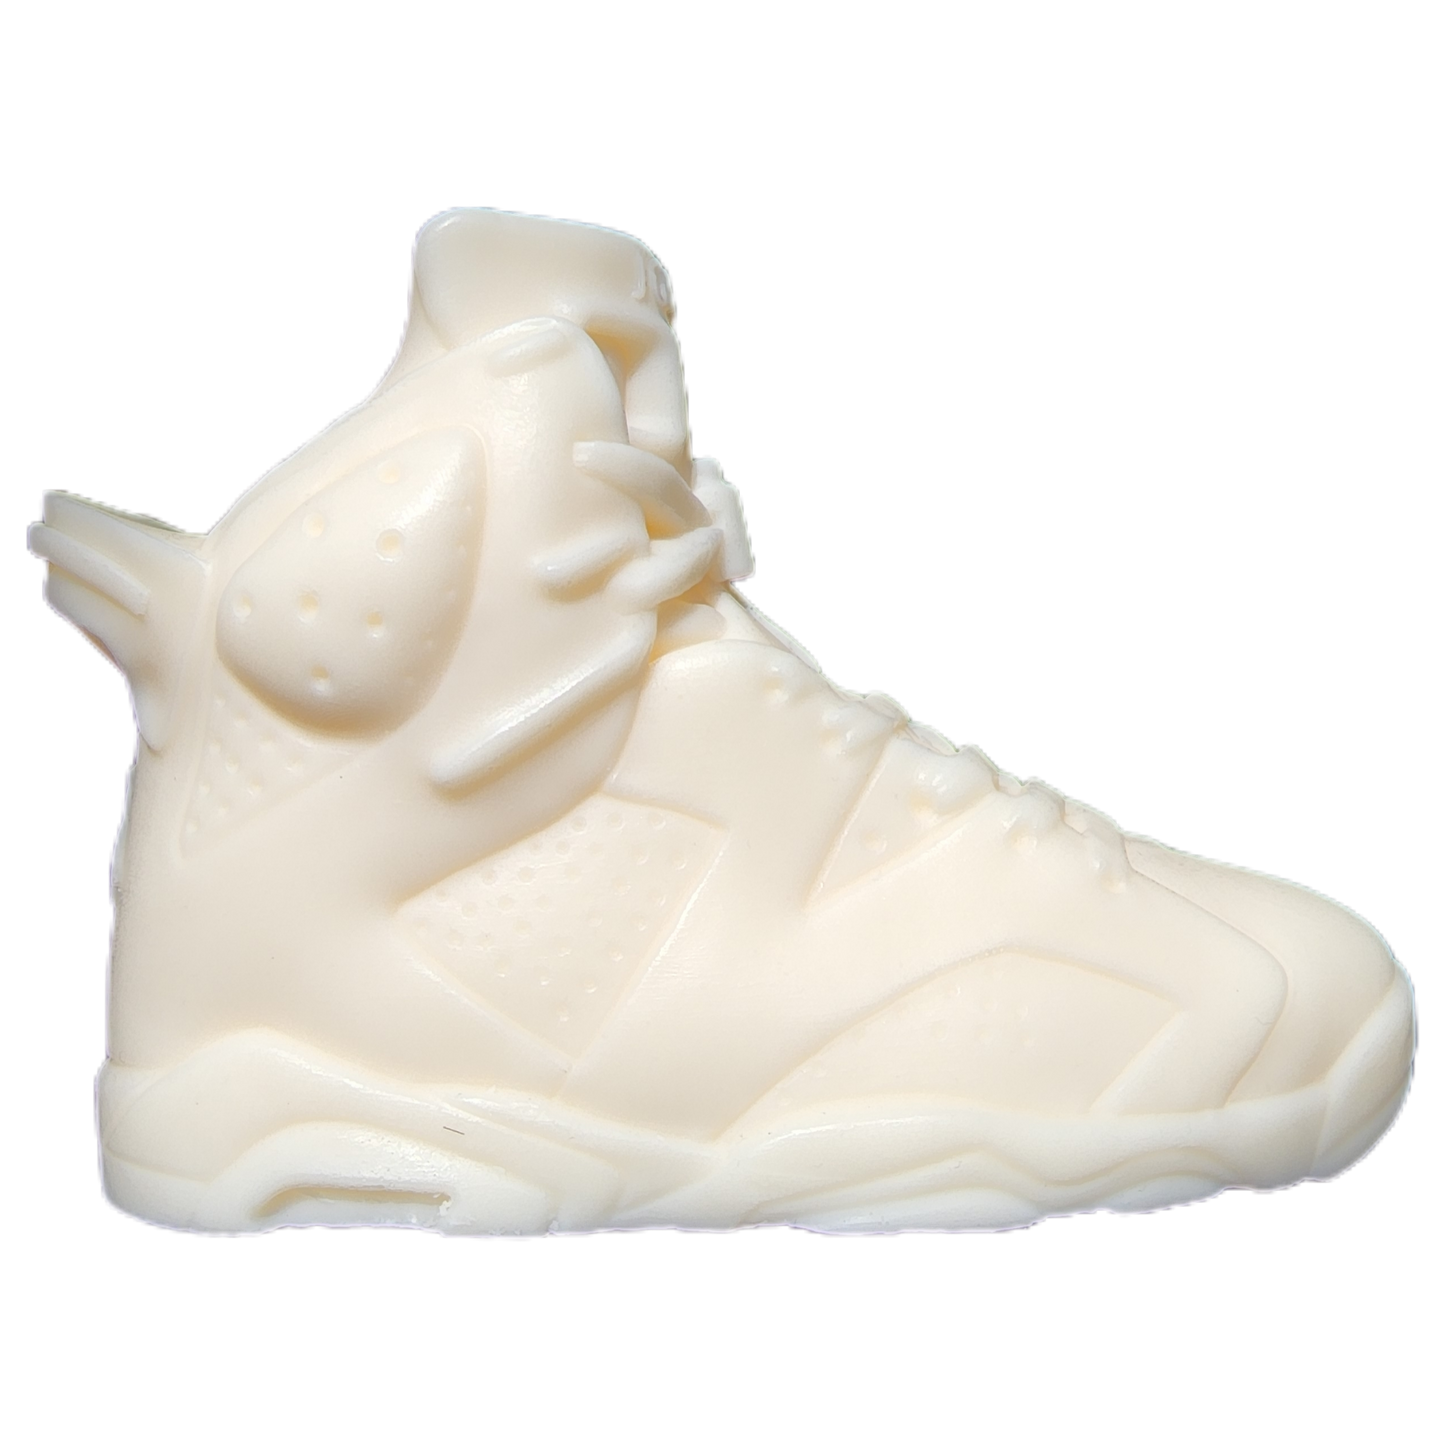 Sneaker Candle